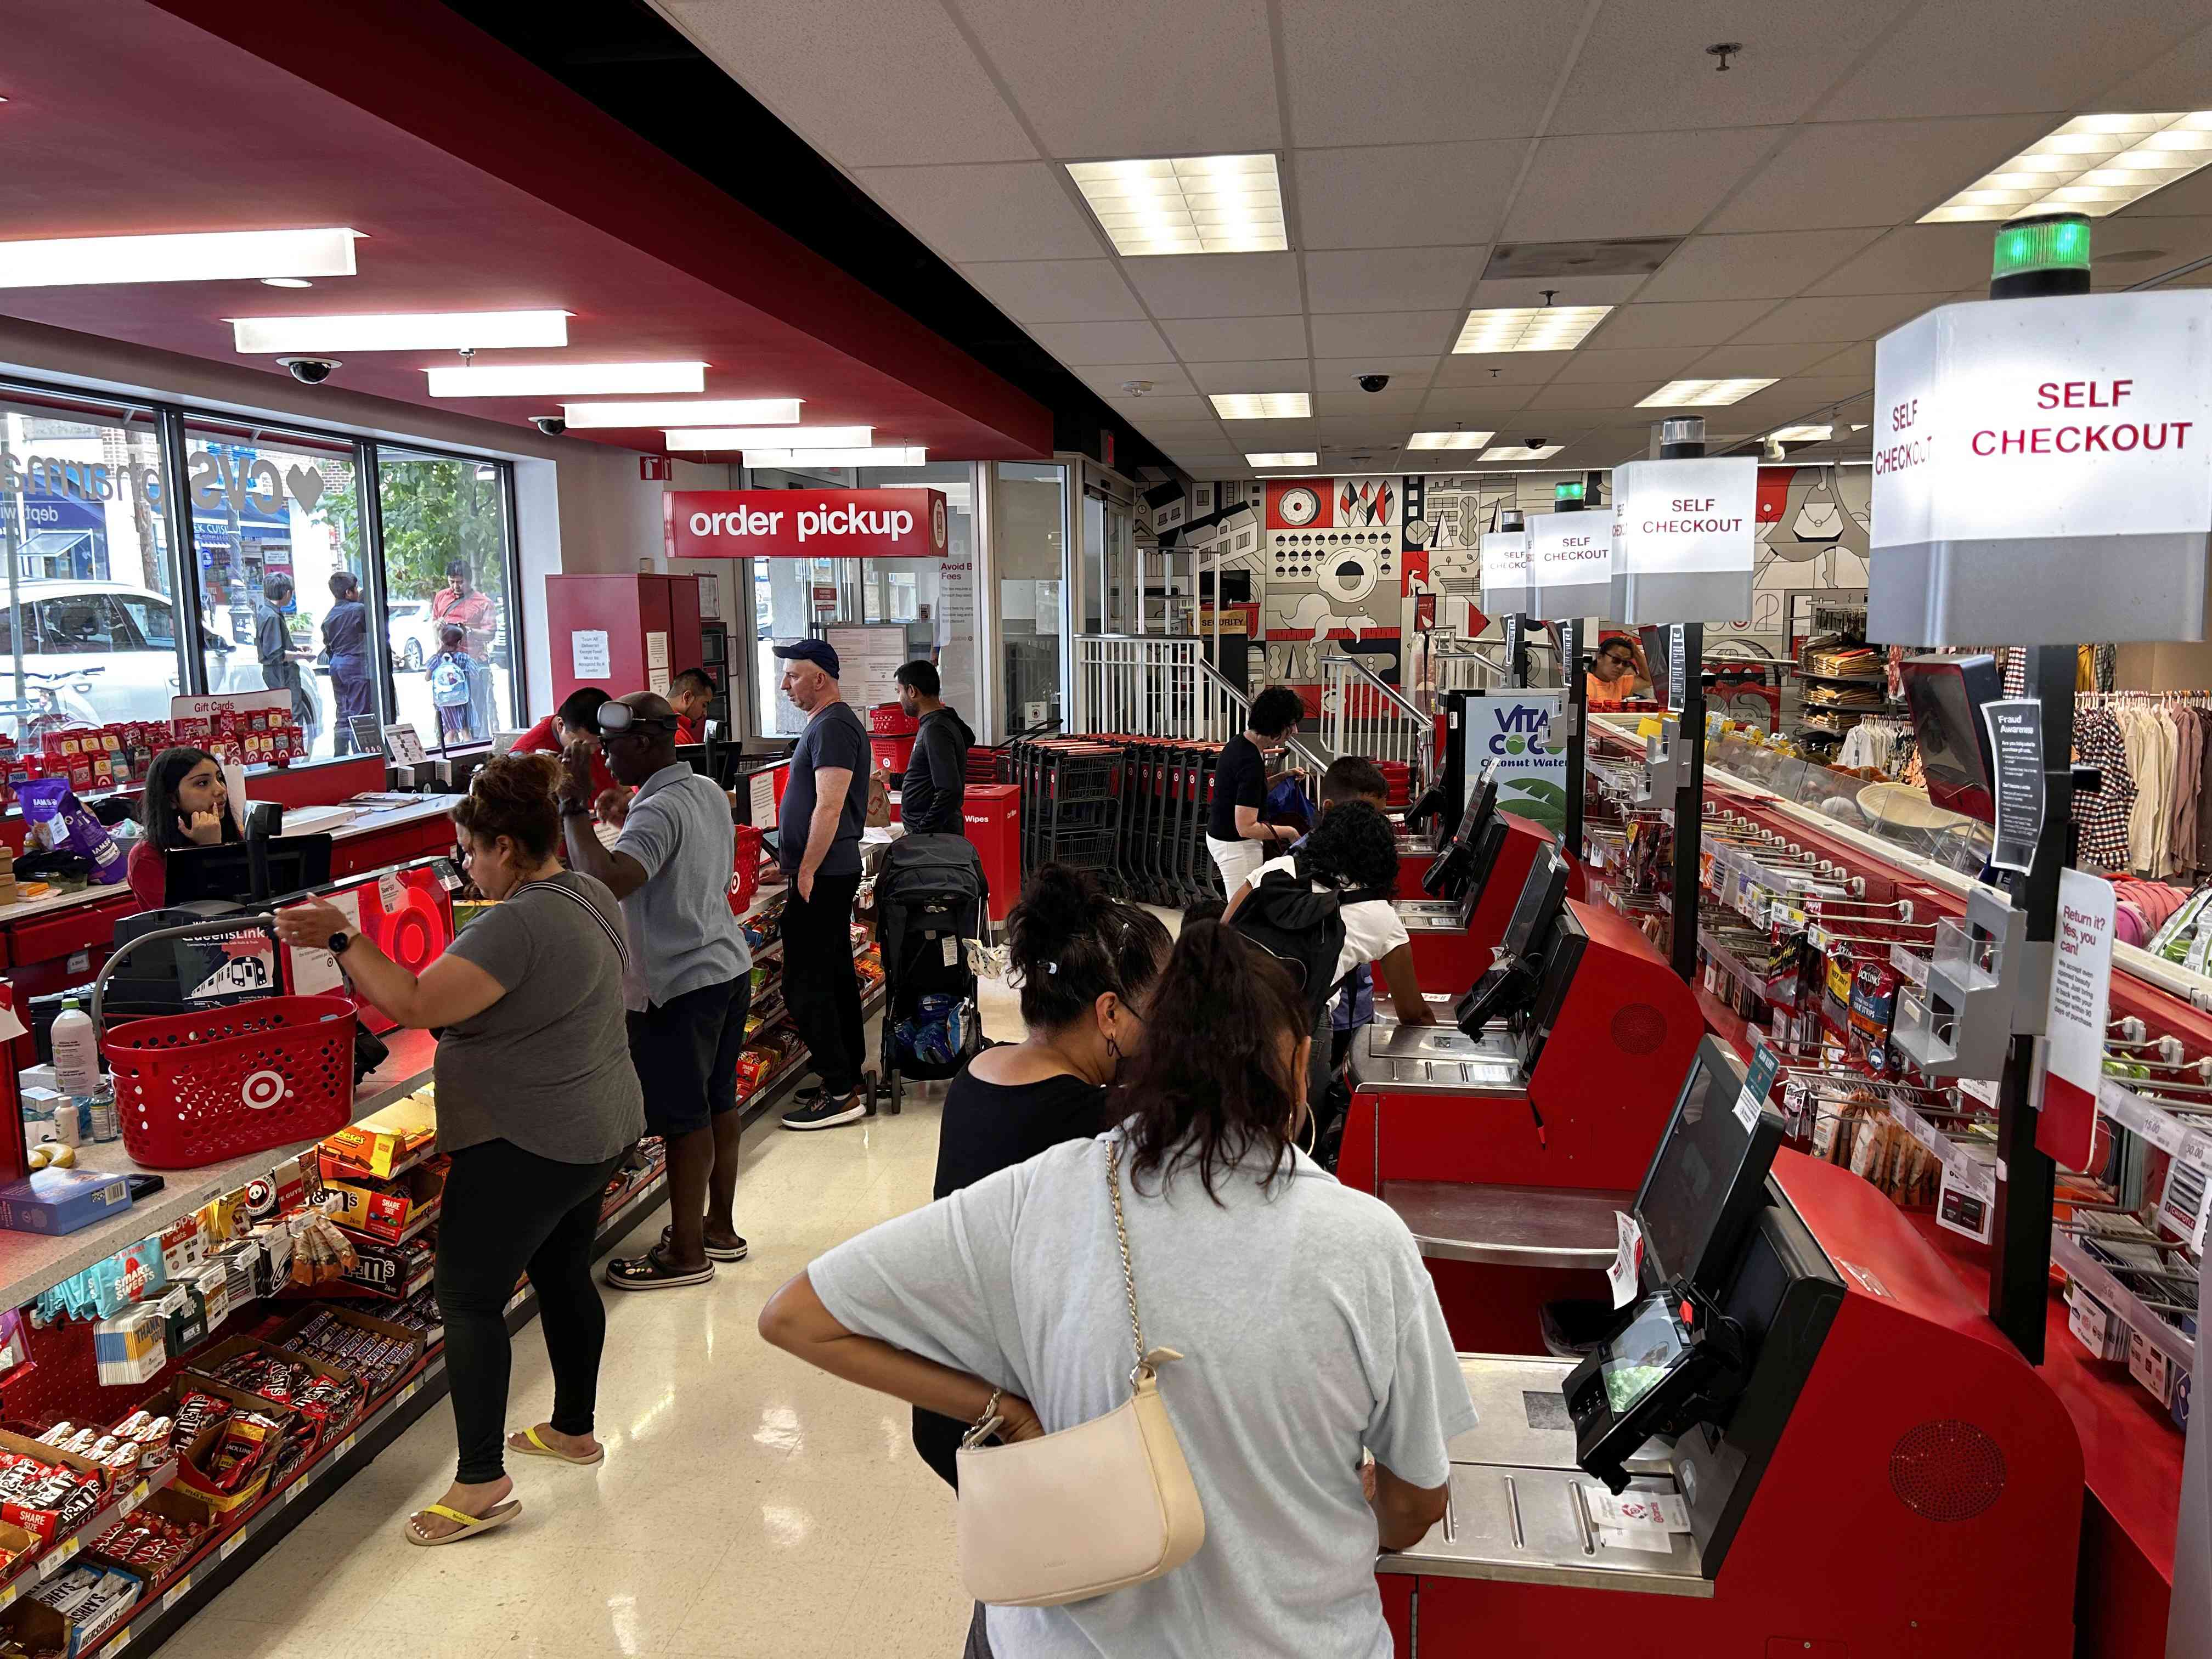 Busy Self checkout vs busy cashier check out at Target Store, Queens, New York.